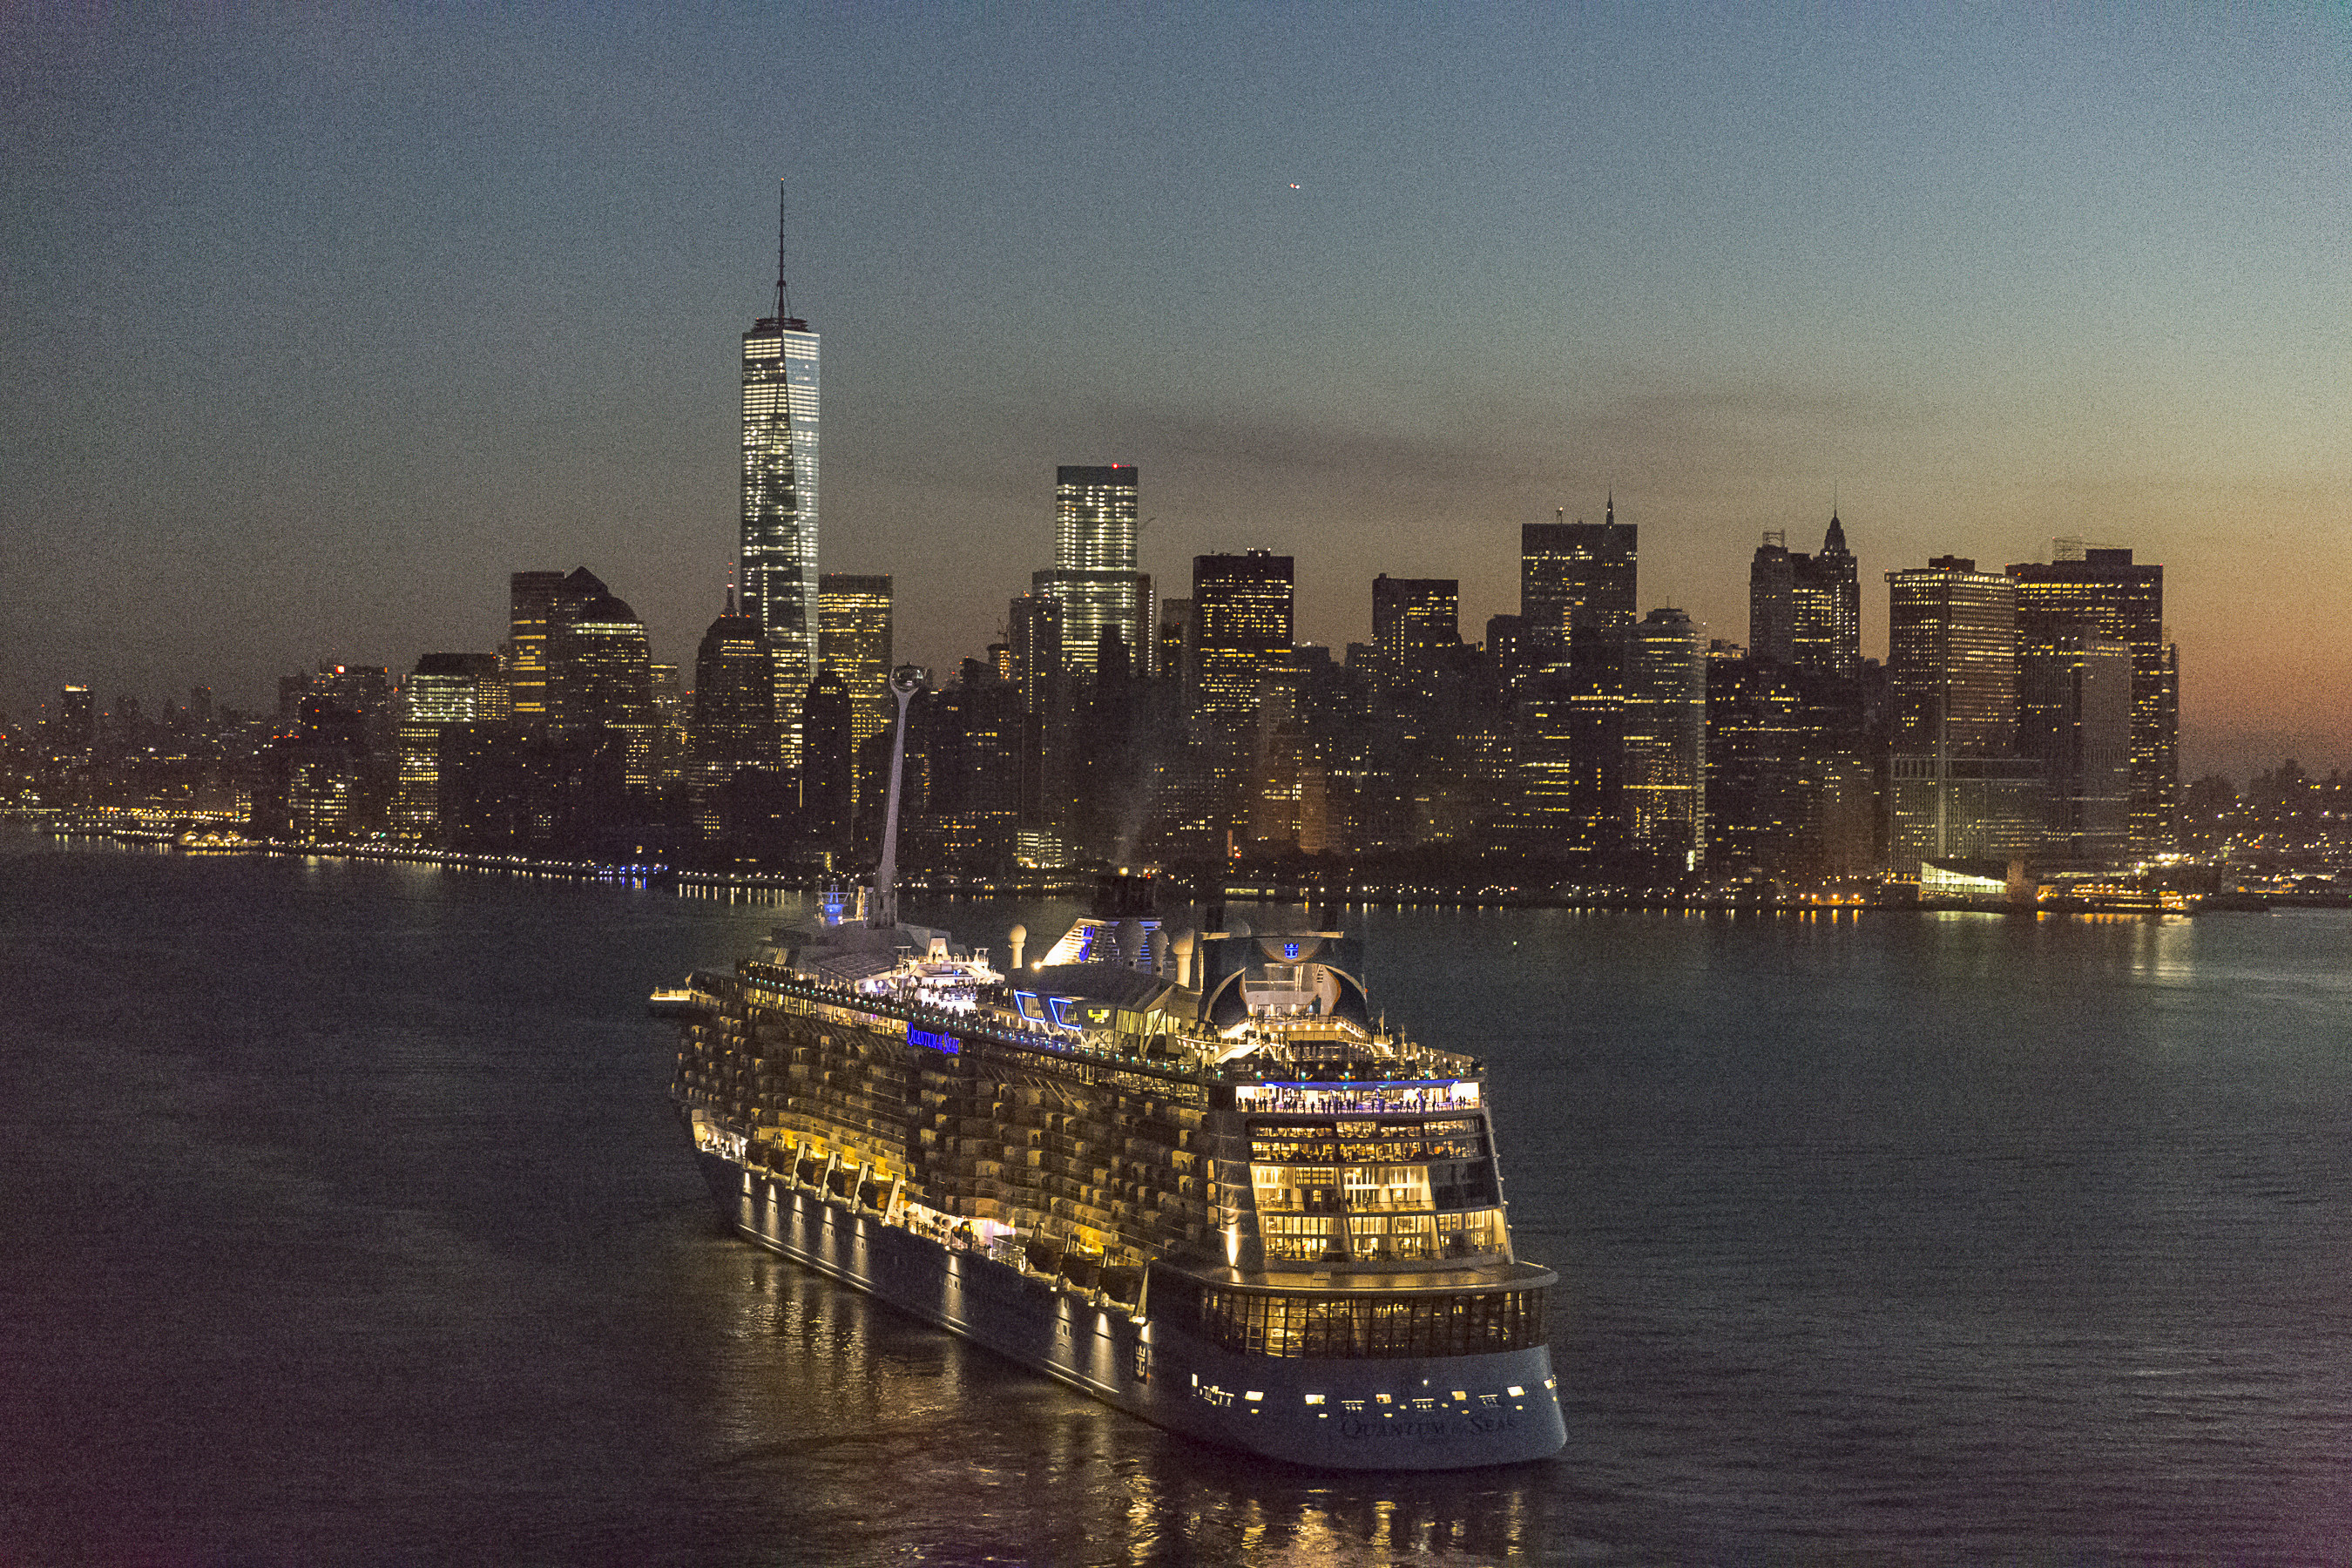 The world's first smartship, Quantum of the Seas, sails into New York Harbor.